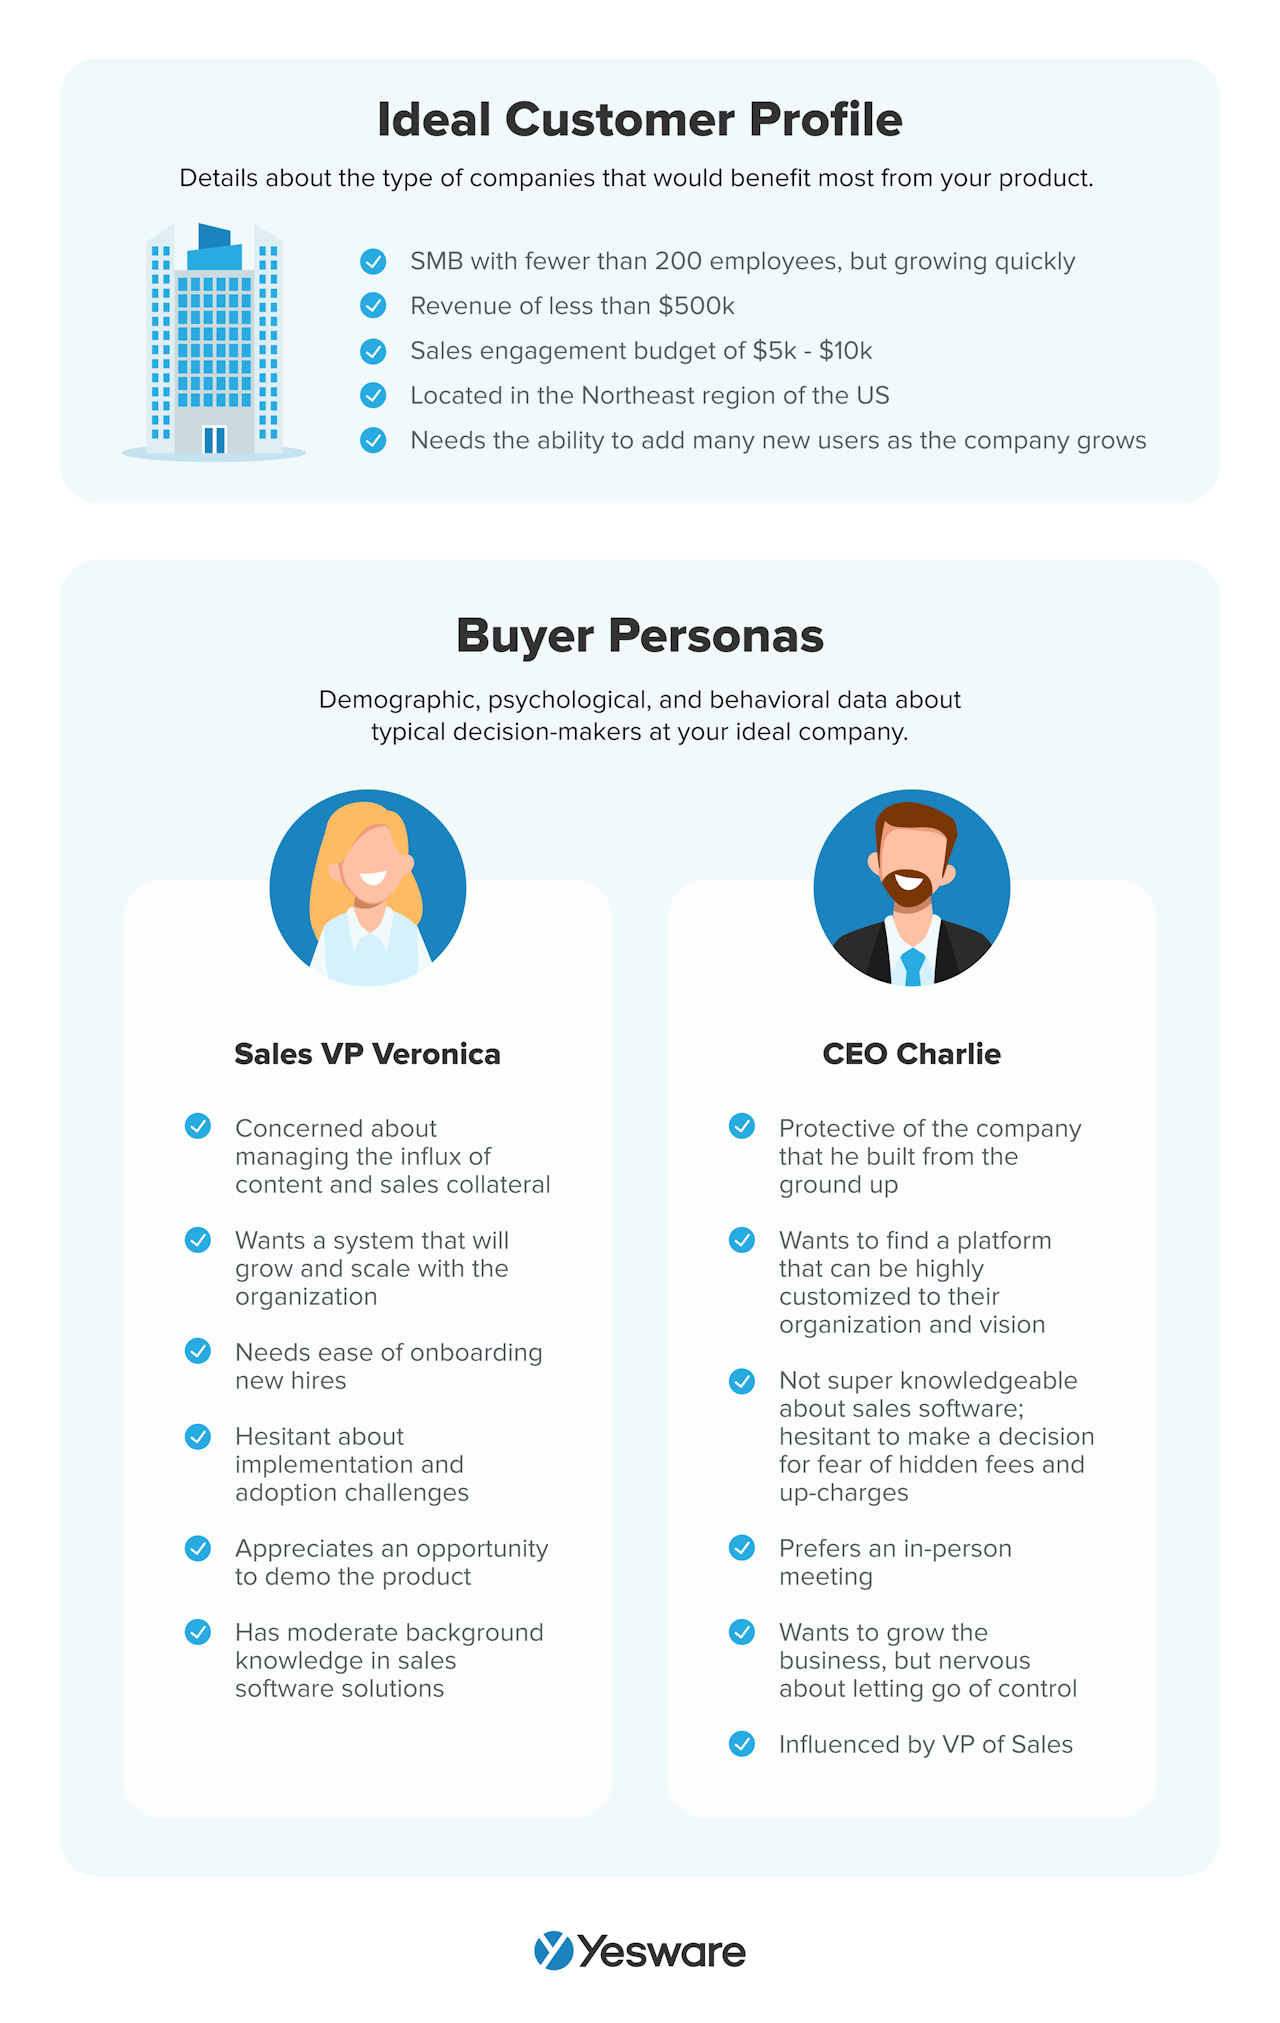 SMB sales: ideal customer profile and buyer personas